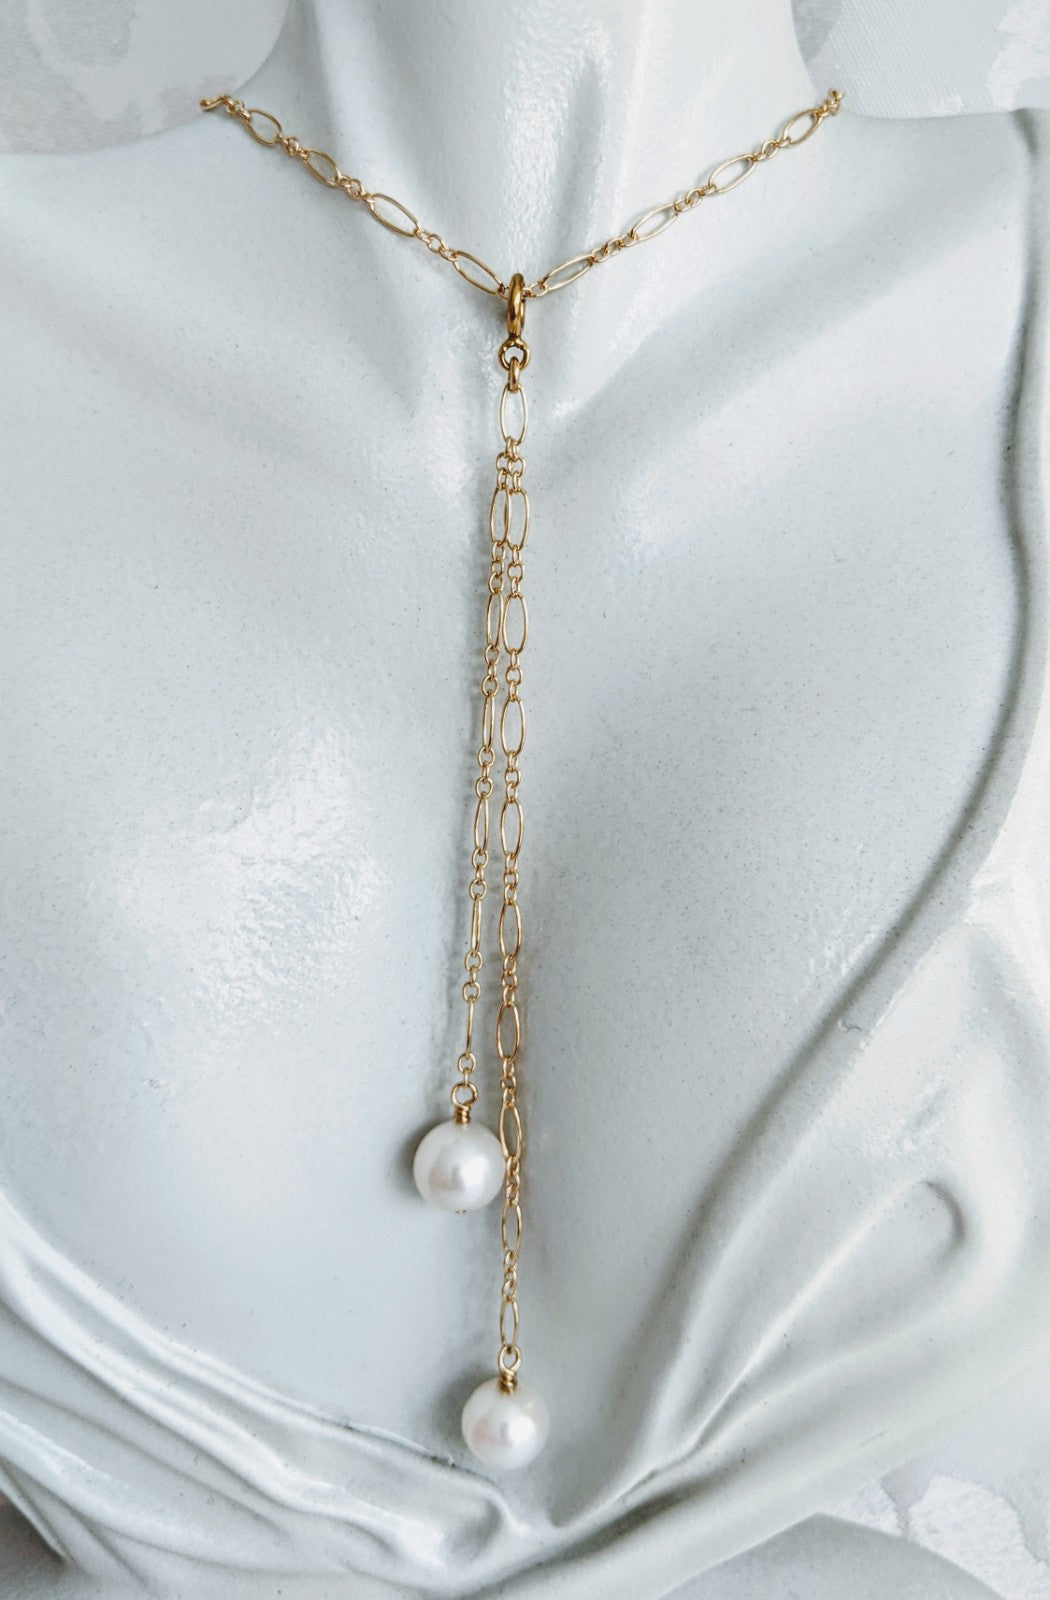 Long and short 14k gold fill necklace with detachable tassel